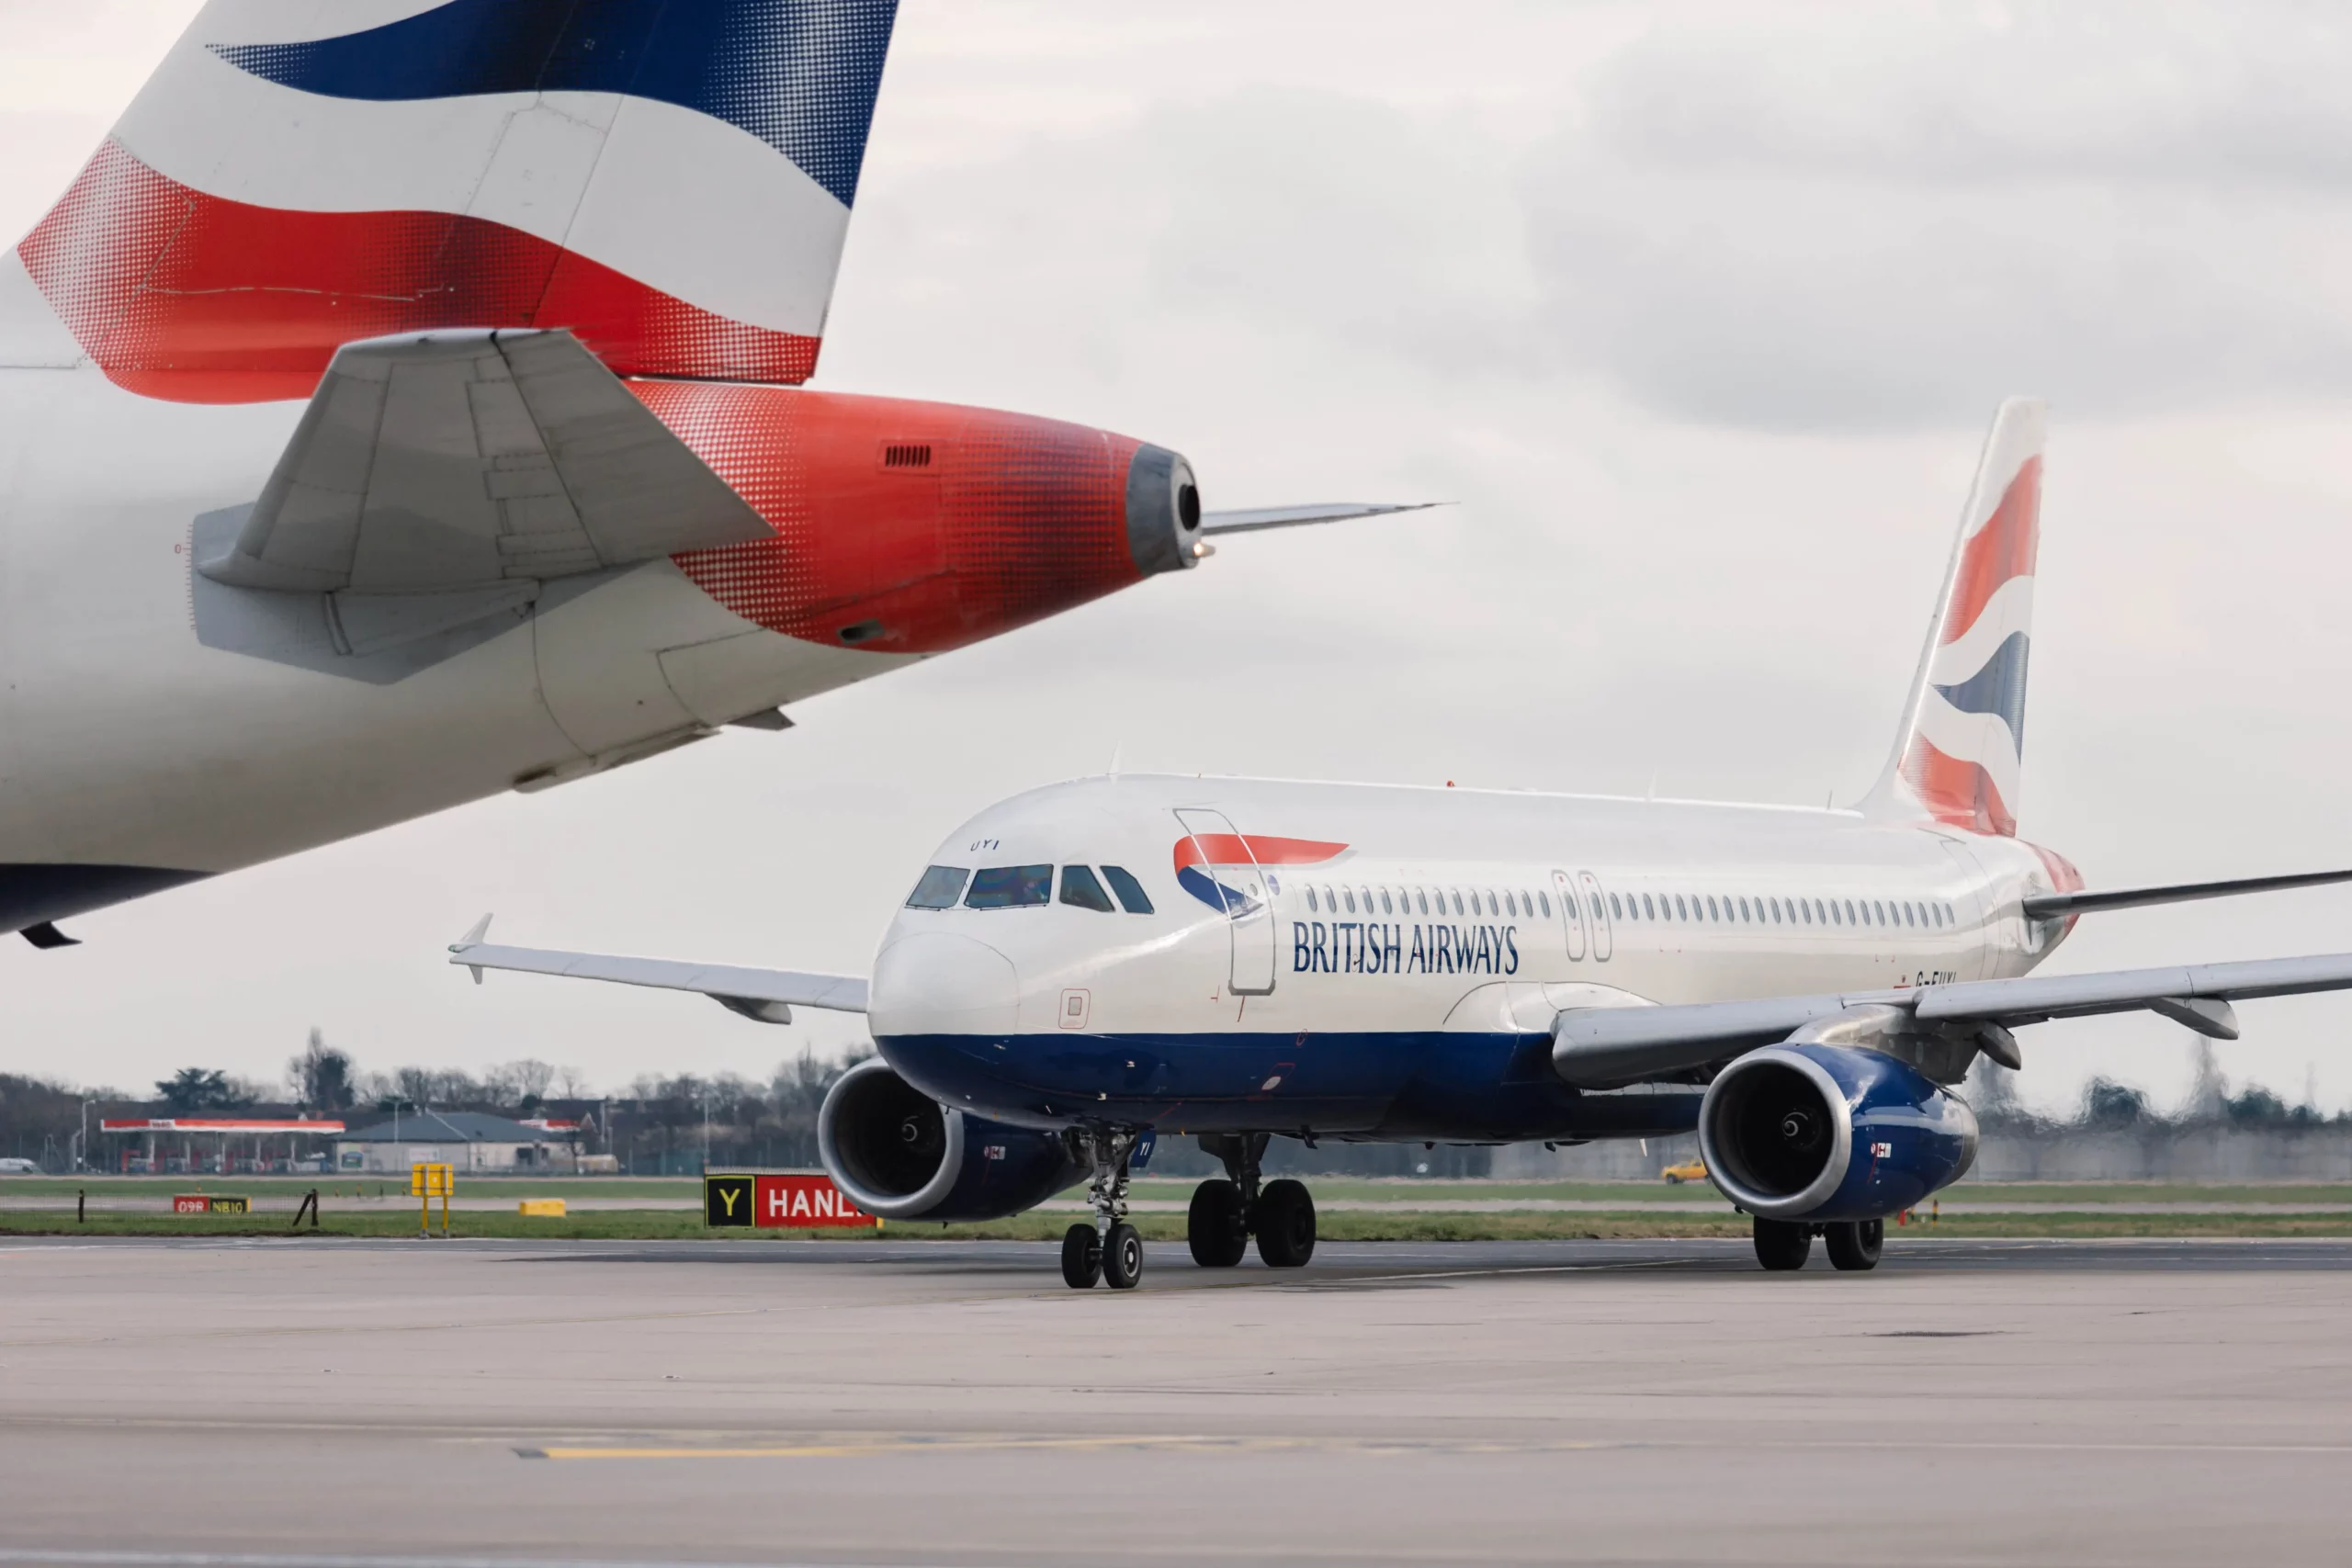 Photograph of a British Airways plane in the background, and the tail of a second British Airways plane in the foreground